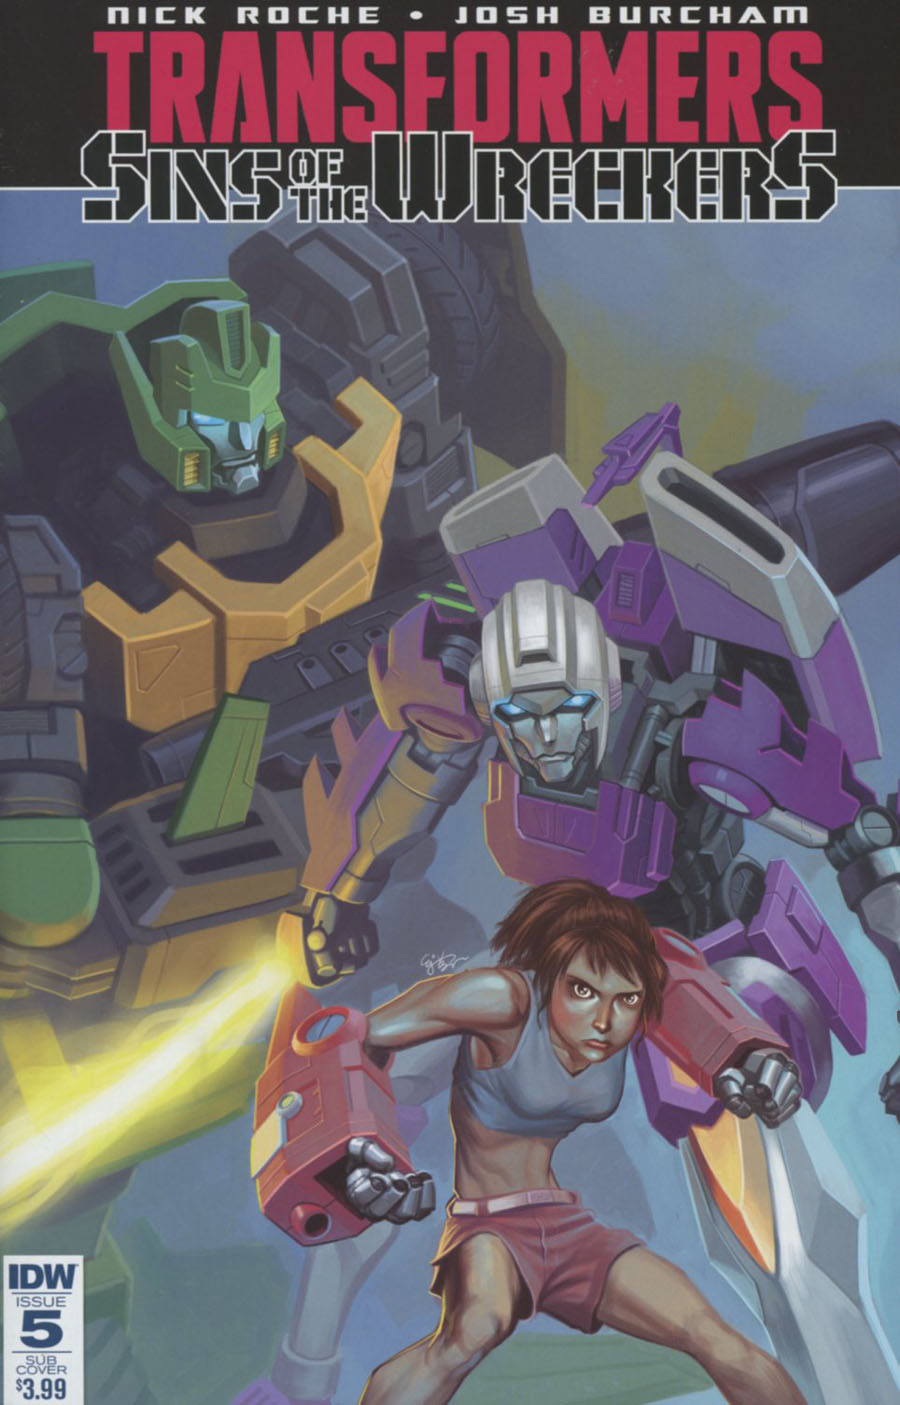 Transformers Sins Of The Wreckers #5 Cover B Variant EJ Su Subscription Cover